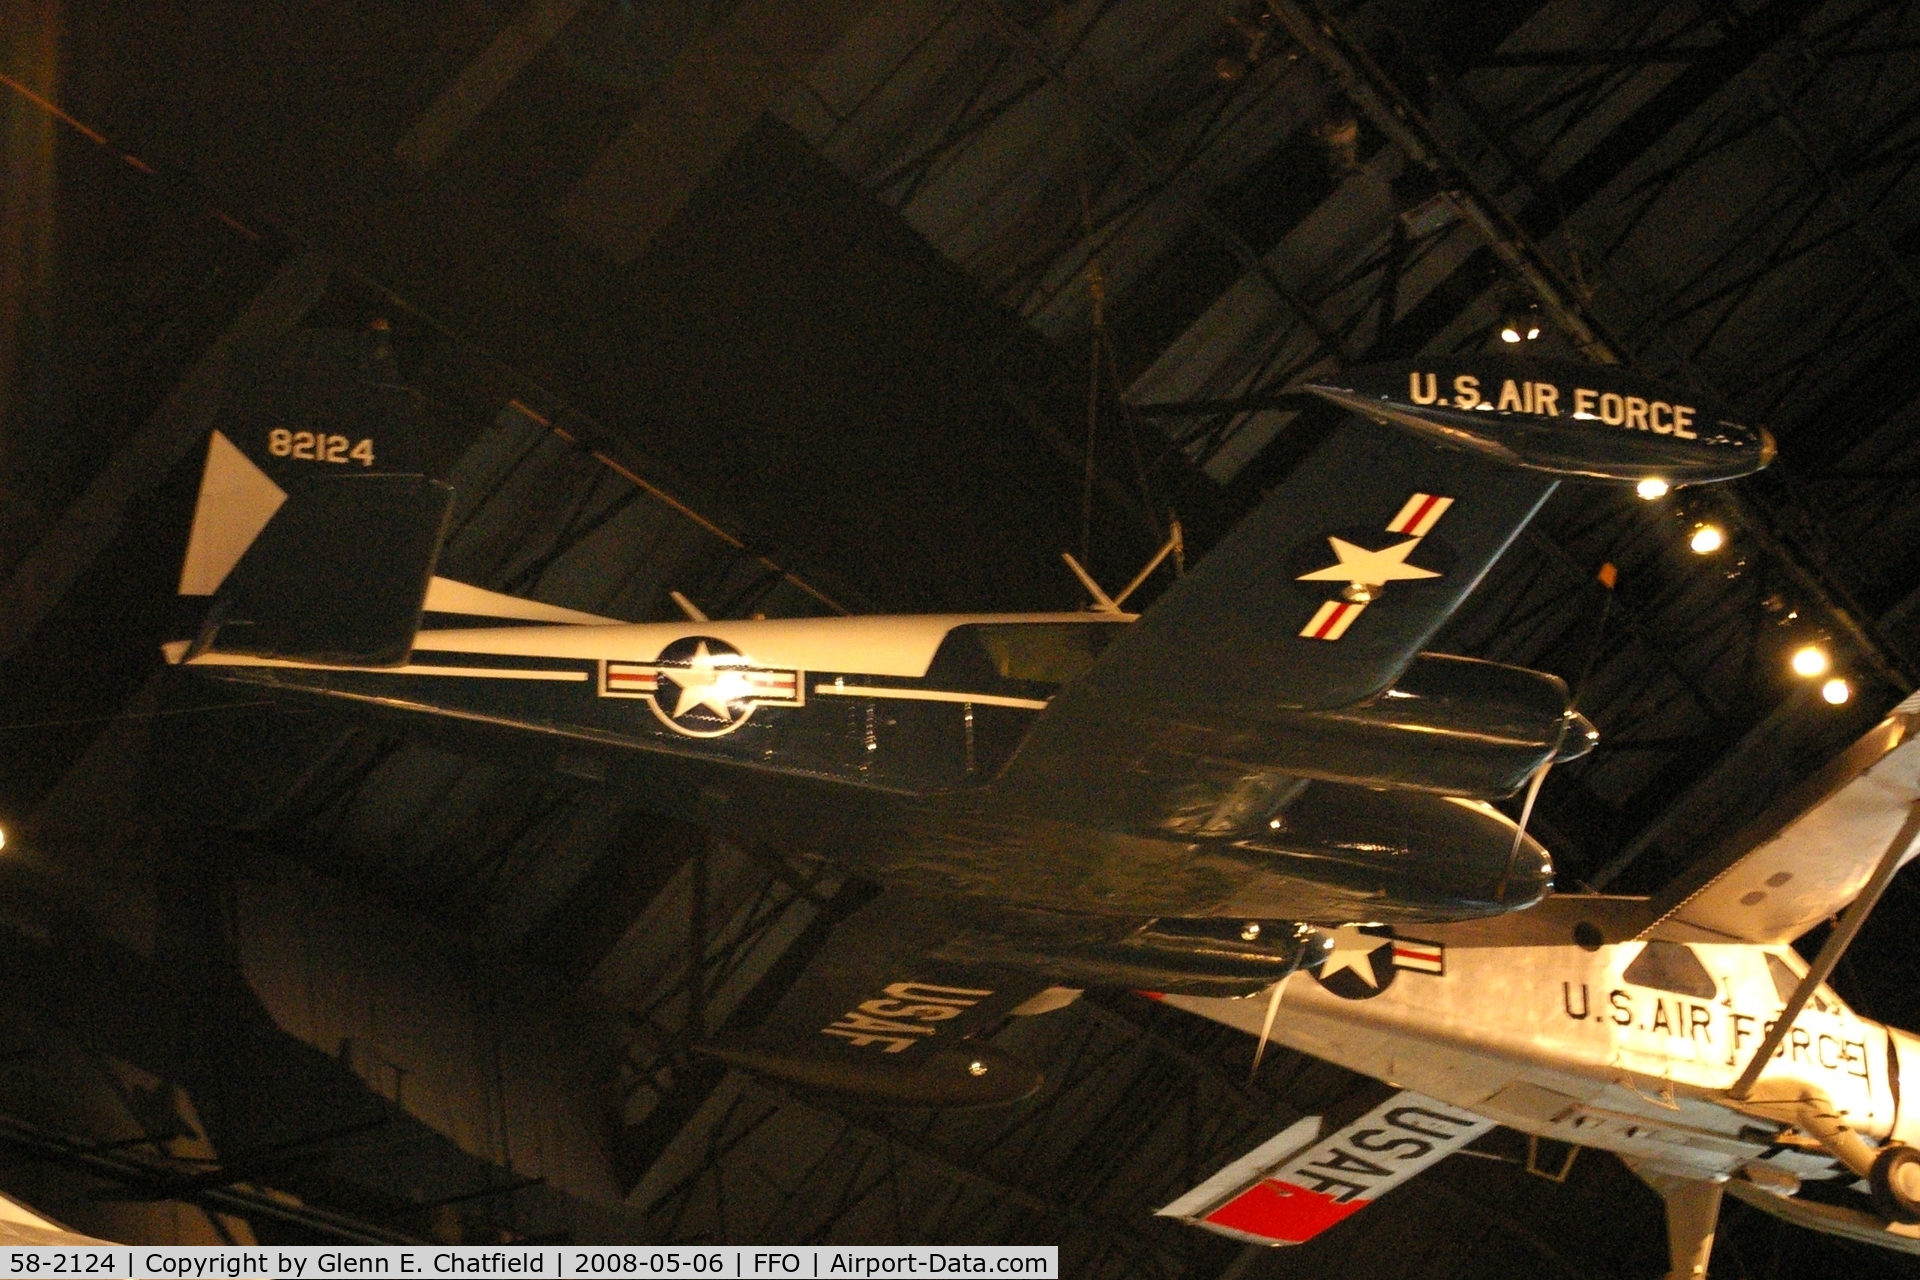 58-2124, 1958 Cessna U-3A Blue Canoe (310A) C/N 38098, Hanging from the ceiling in the National Museum of the U.S. Air Force